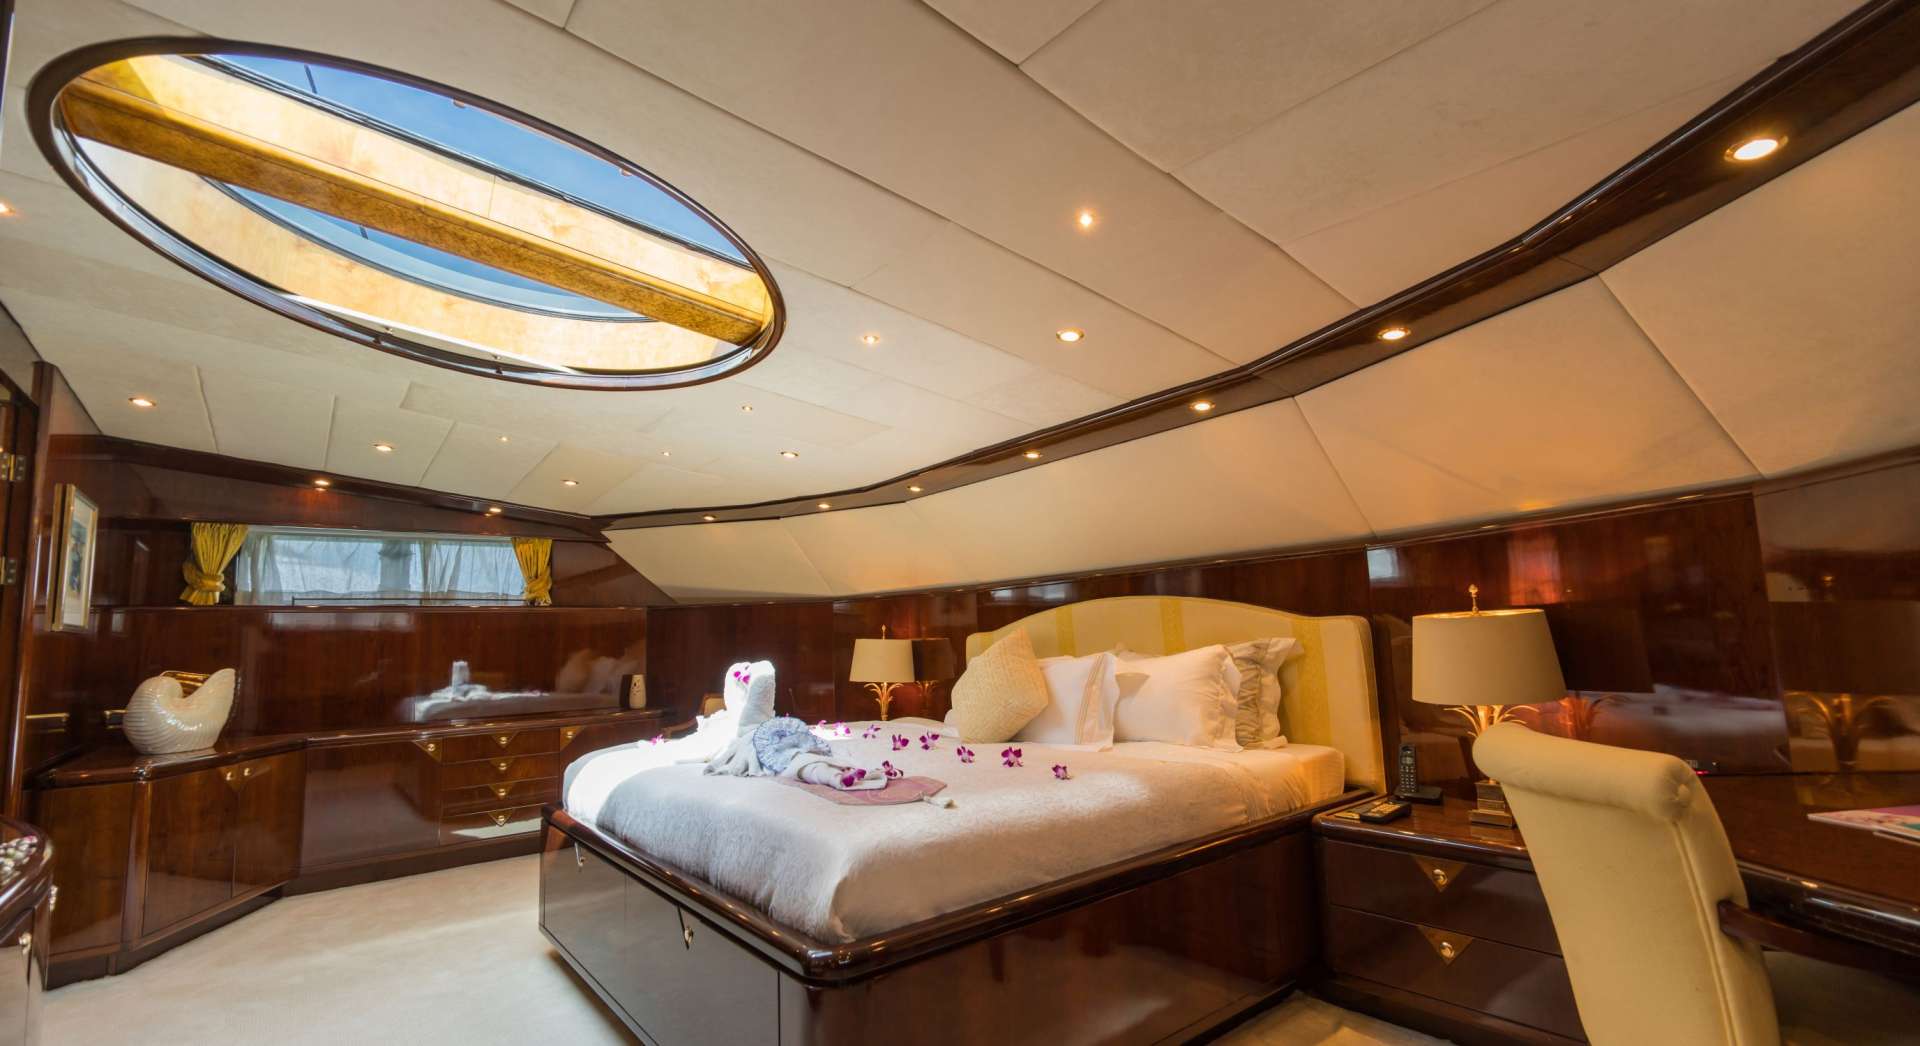 xanadu of london - Superyacht charter Thailand & Boat hire in SE Asia 6